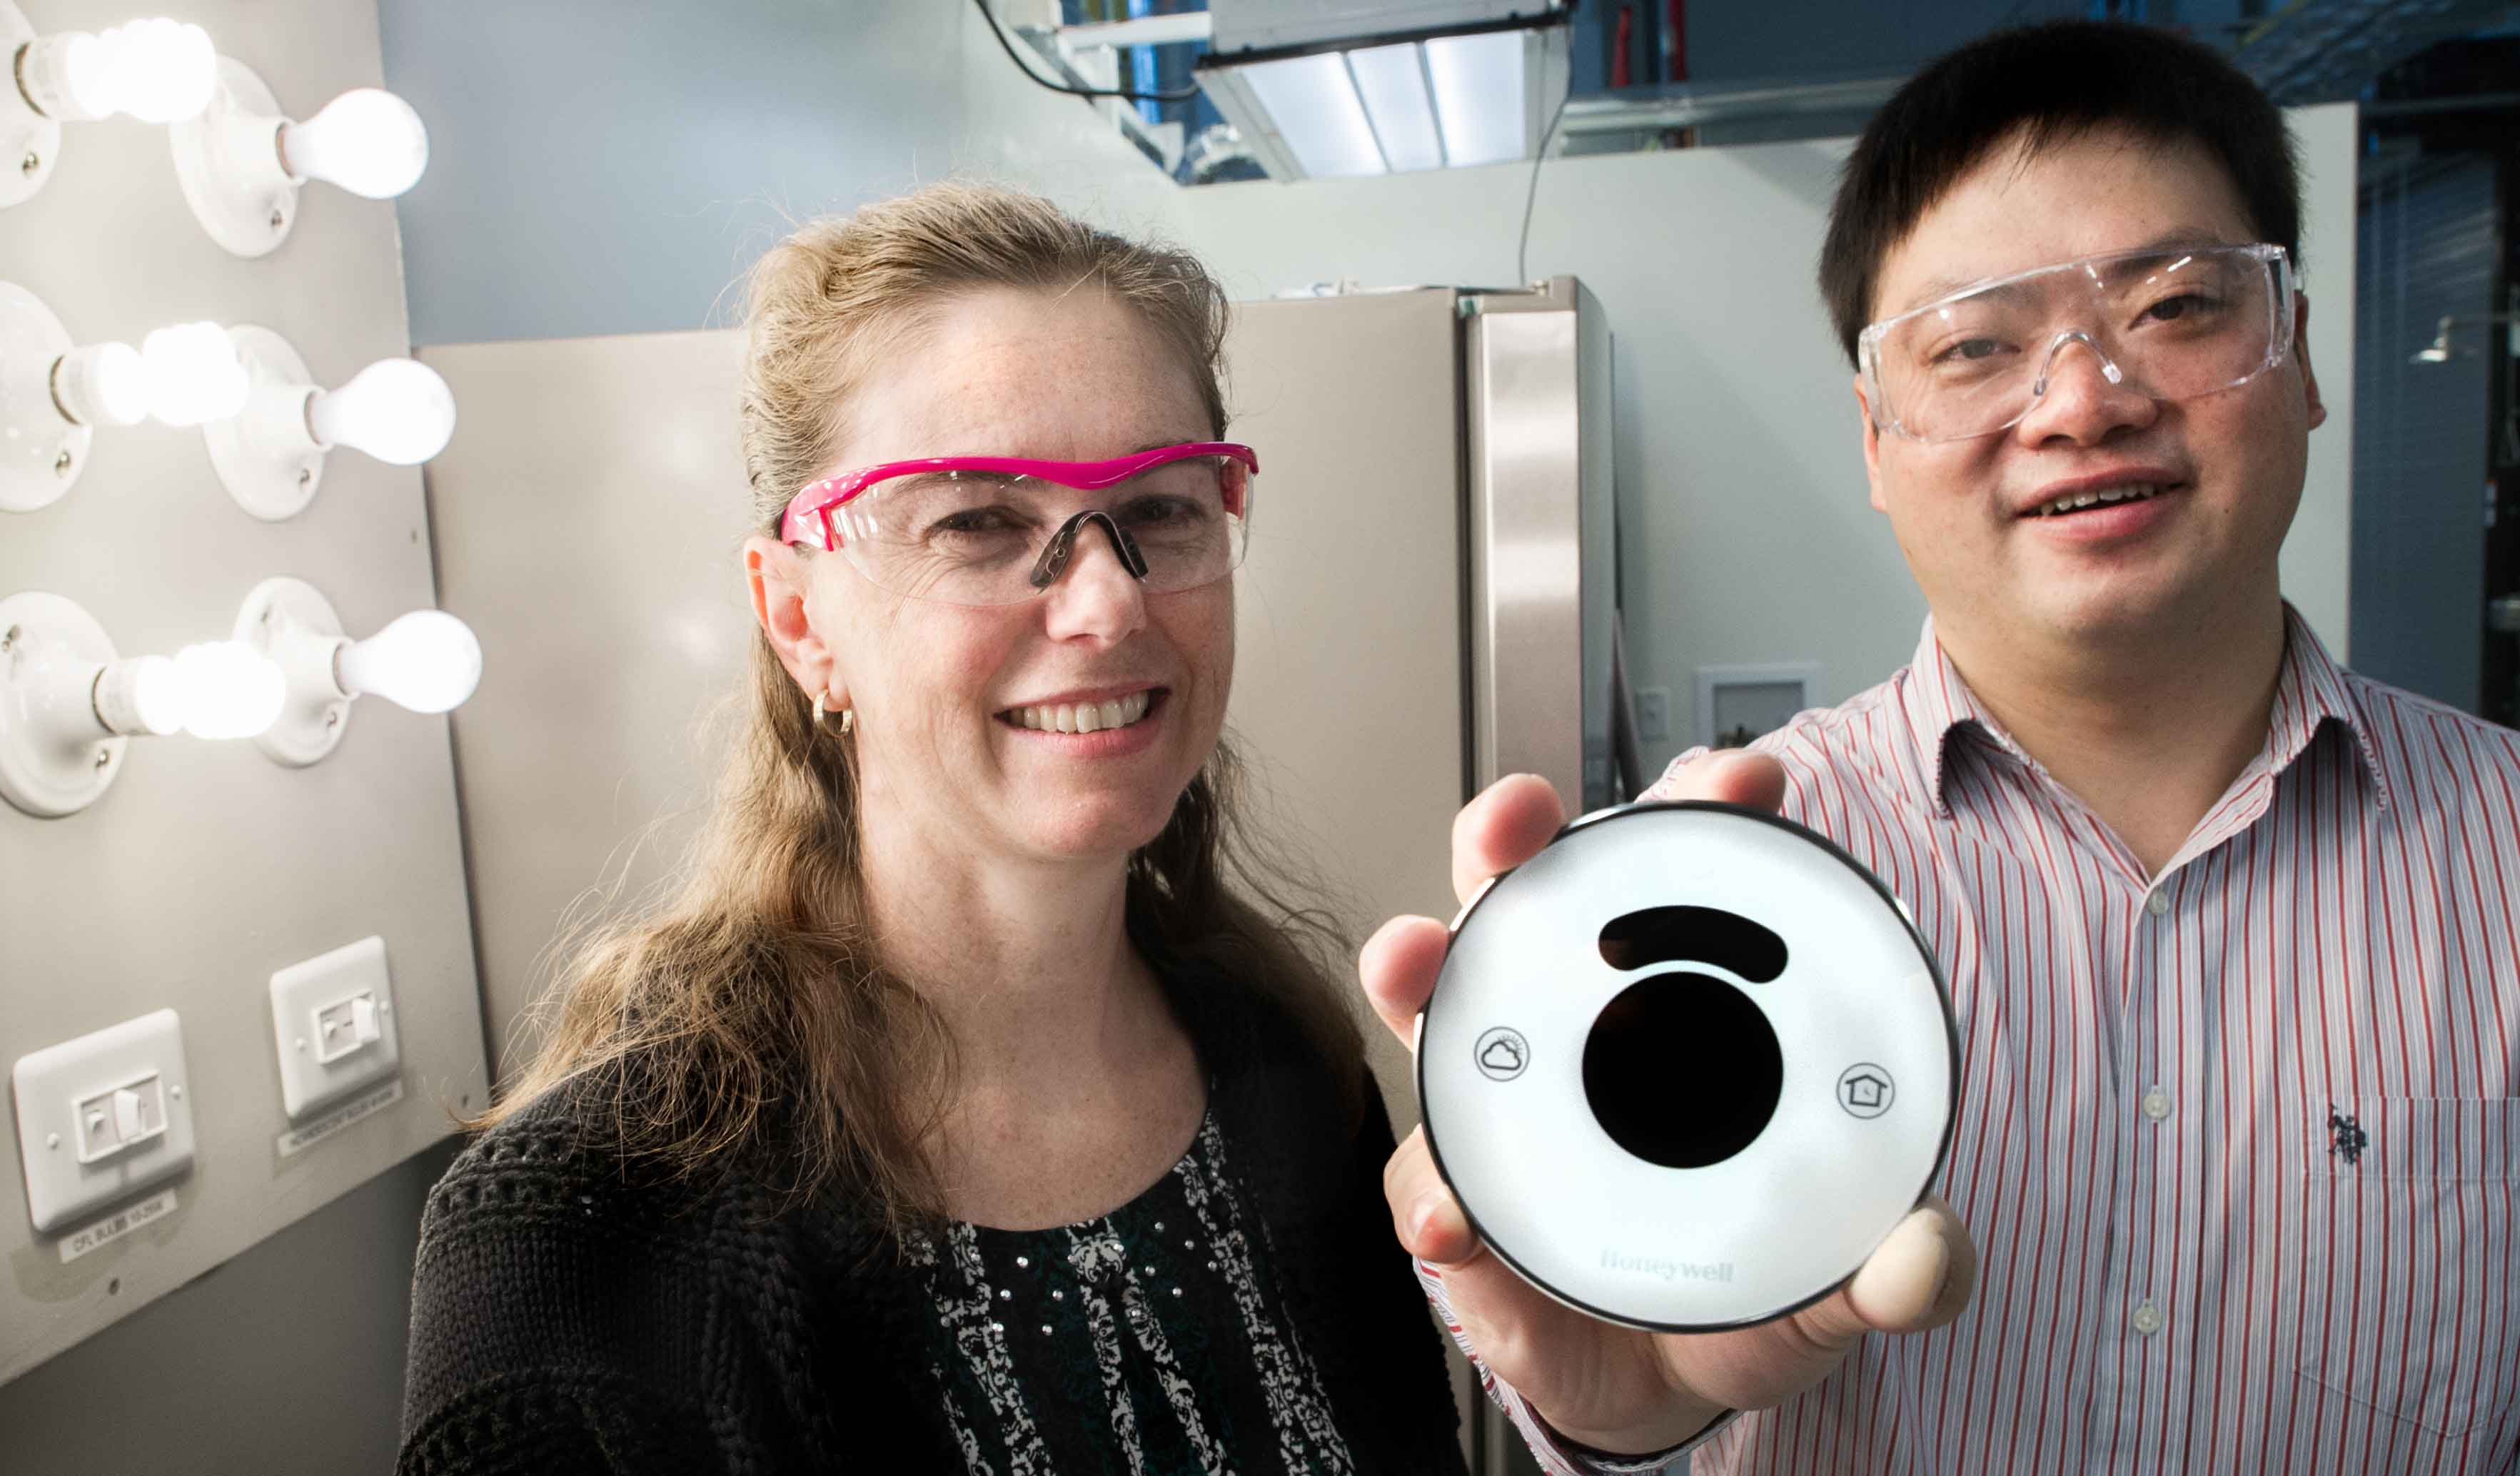 A man and a woman stand inside a laboratory. The man is holding a smart thermostat.